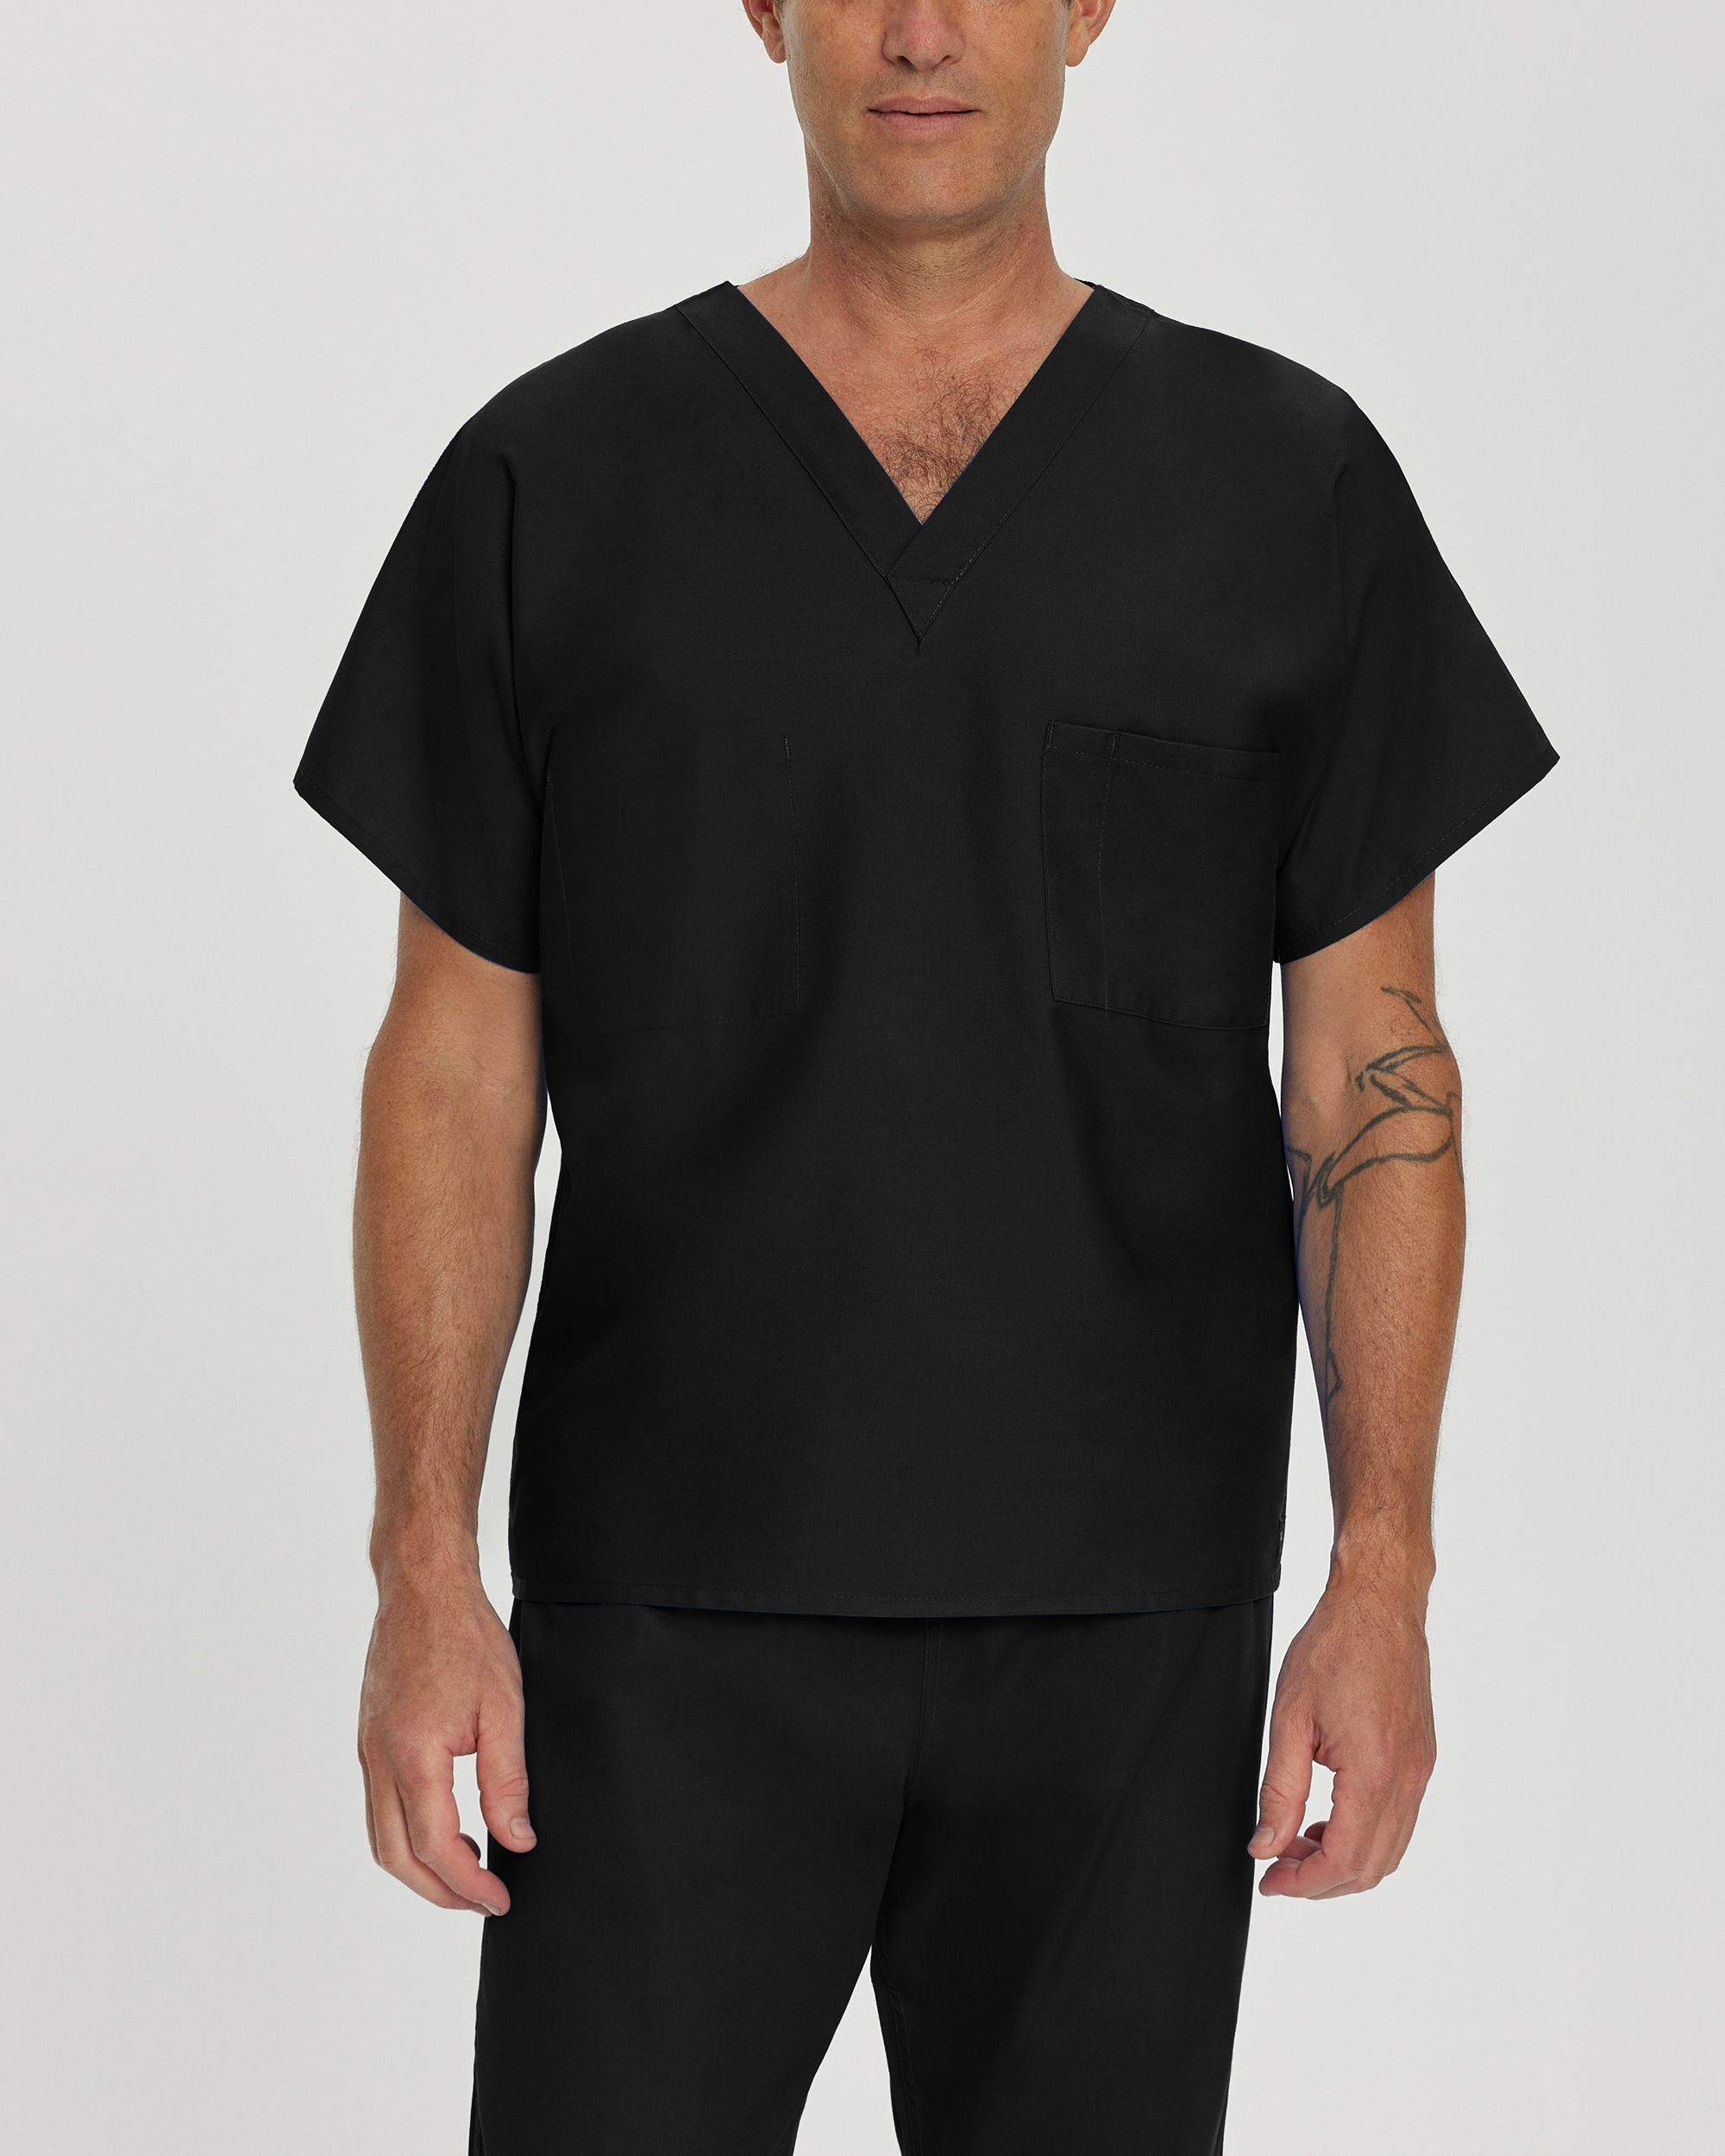 What is the material of the classic v-neck scrub by Landau?